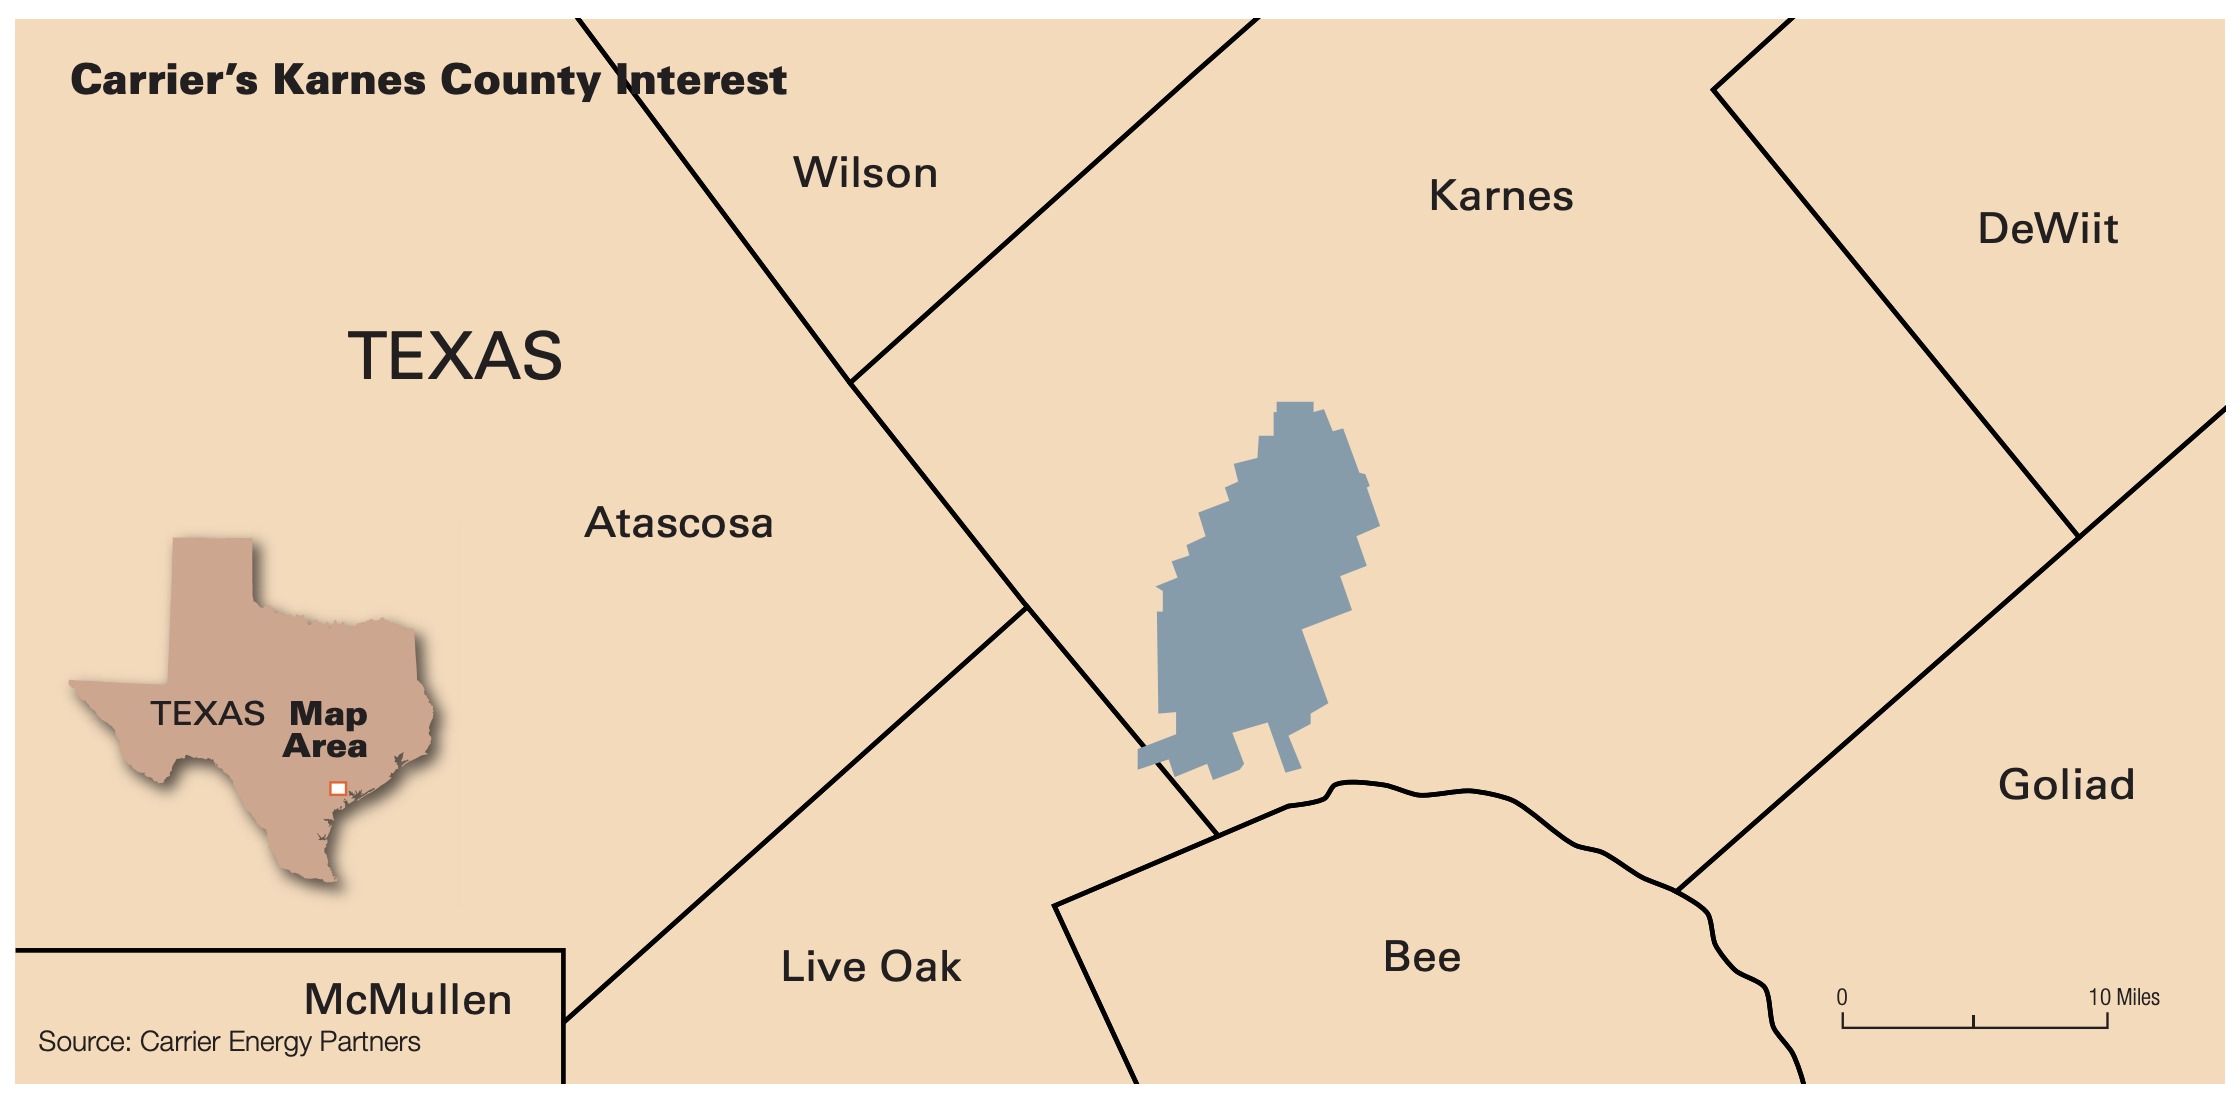 Carrier's Karnes County Interest (Source: Carrier Energy Partners)